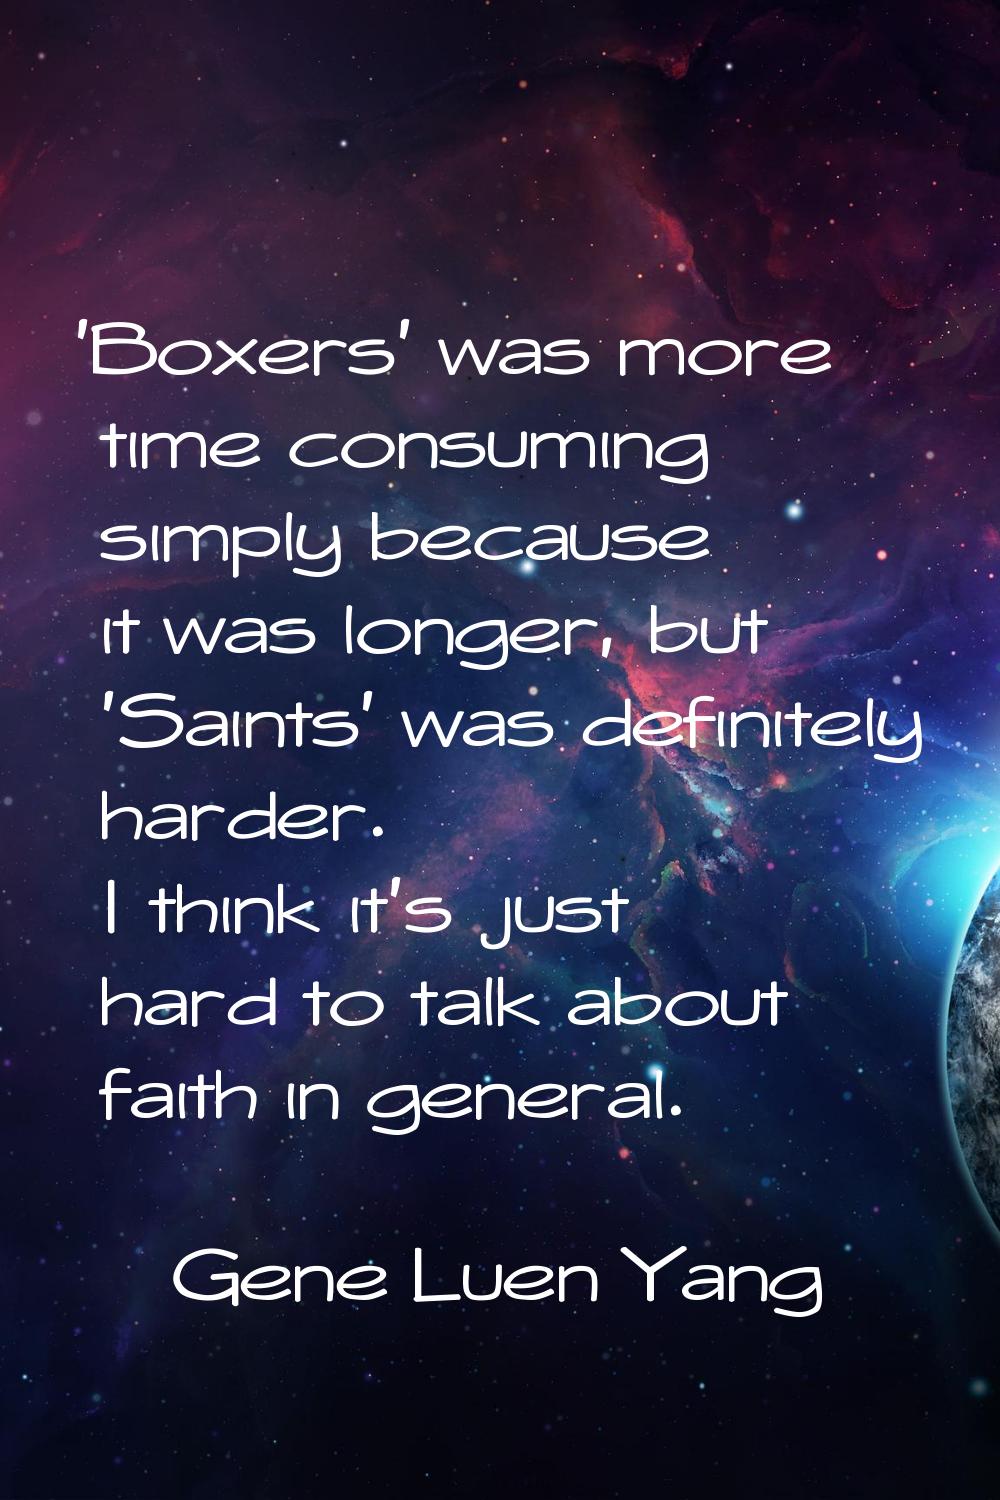 'Boxers' was more time consuming simply because it was longer, but 'Saints' was definitely harder. 